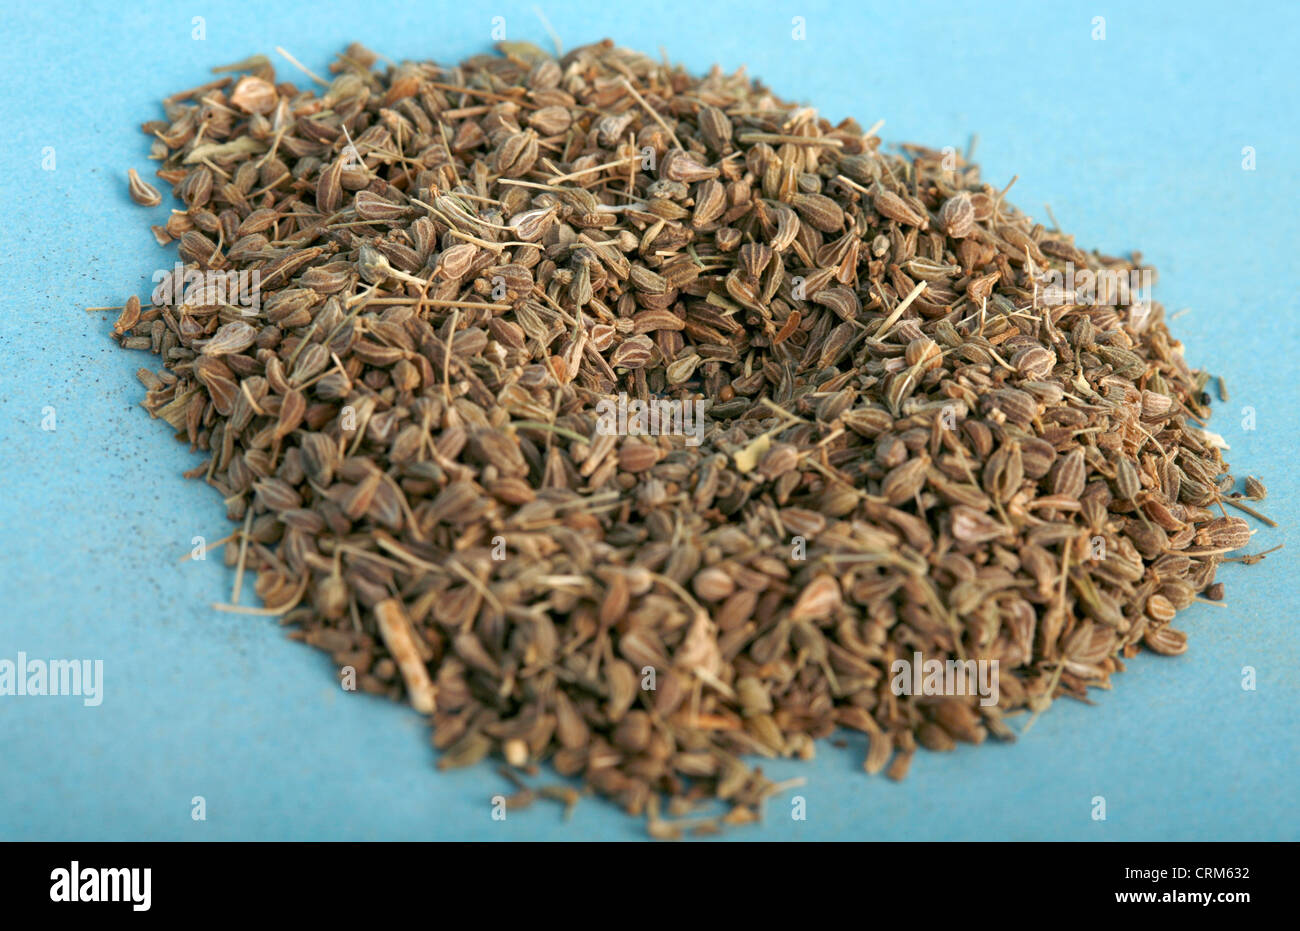 Anise fruit contains anethole, an aromatic compound that accounts for its distinctive liquorice flavor. Anise leaves can be used to treat digestive problems, relieve toothache, and its essential oil to treat lice and scabies. Stock Photo